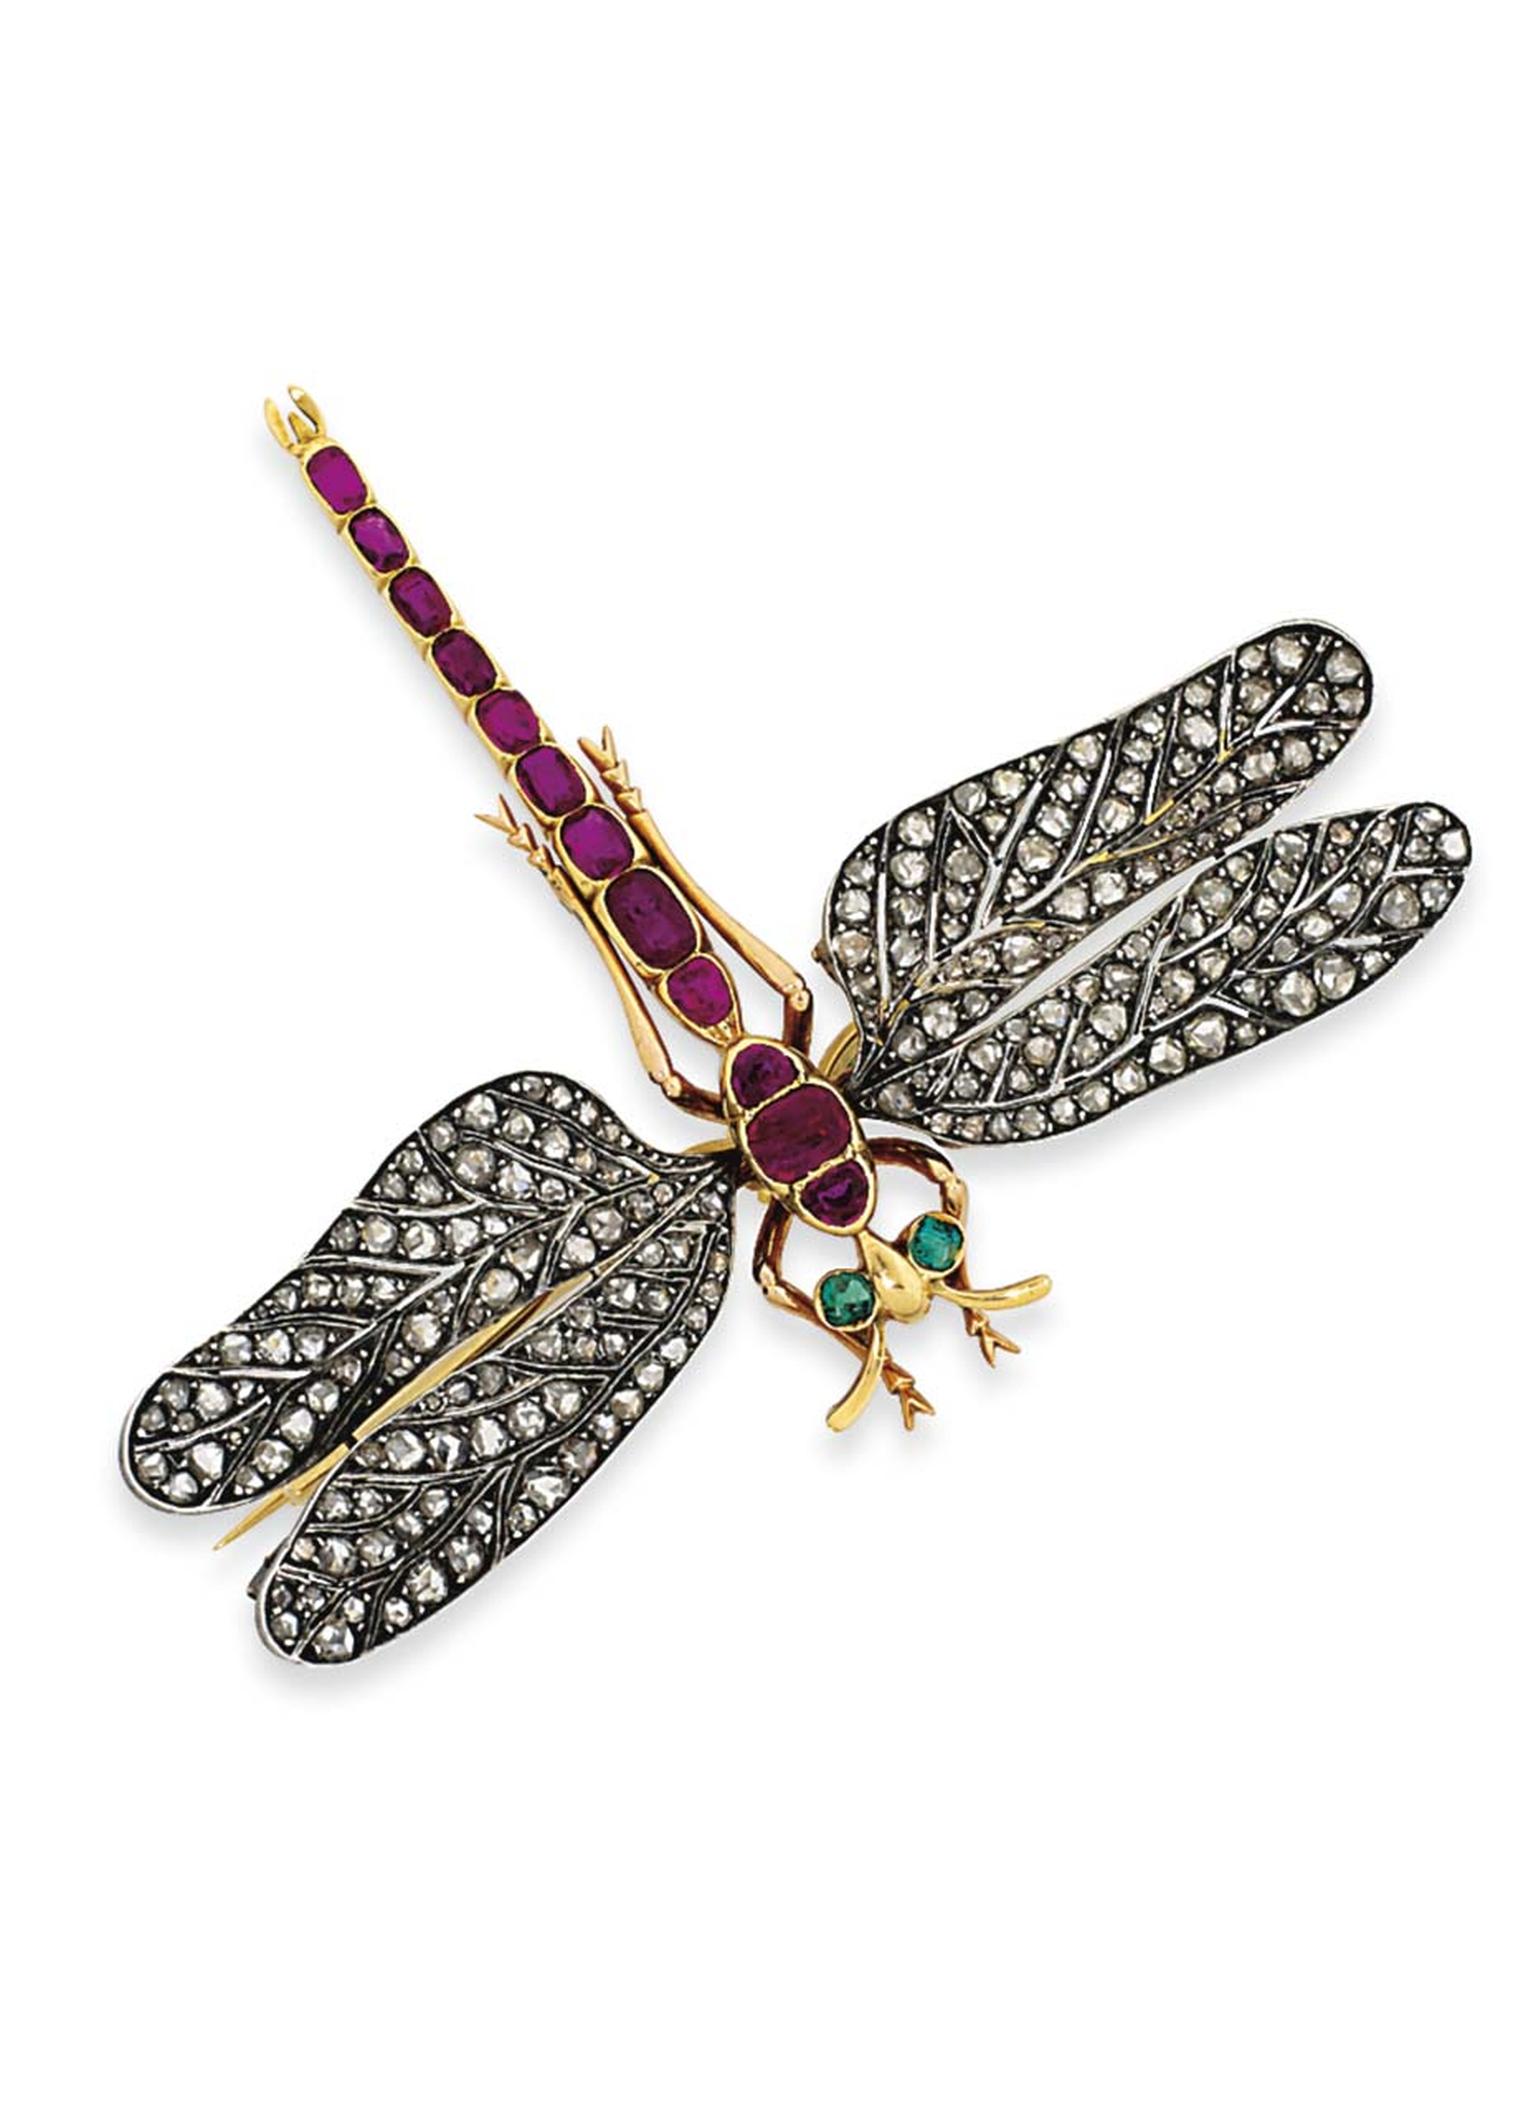 Lot 4, a dragonfly brooch dating from the late 19th century, looks real enough to flutter its wings (estimate: £5,000-7,000). Christie's Important Jewels Sale on 26 November at King Street in London.